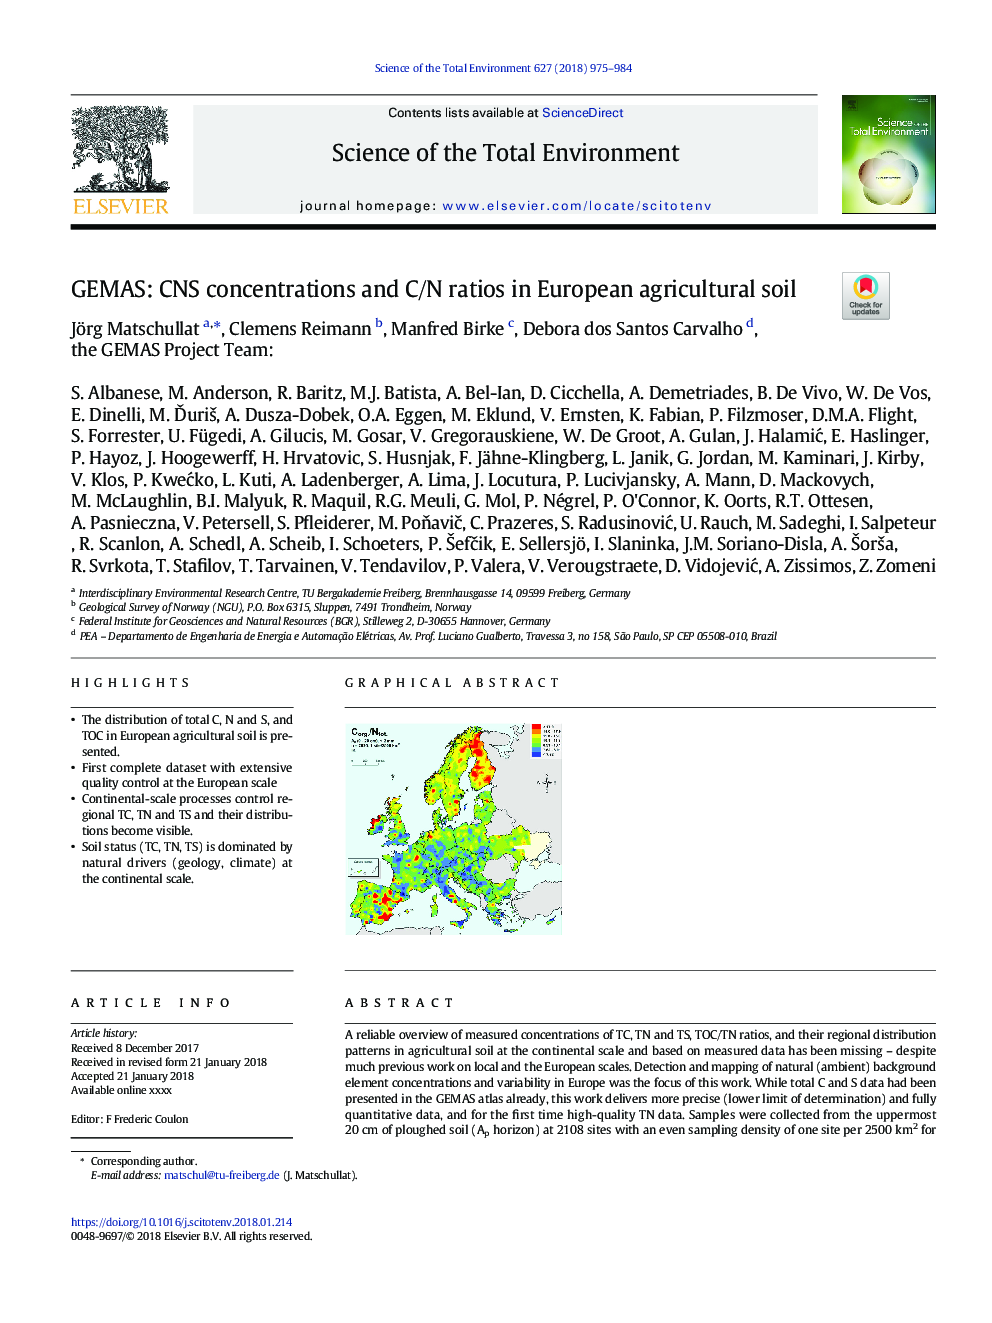 GEMAS: CNS concentrations and C/N ratios in European agricultural soil